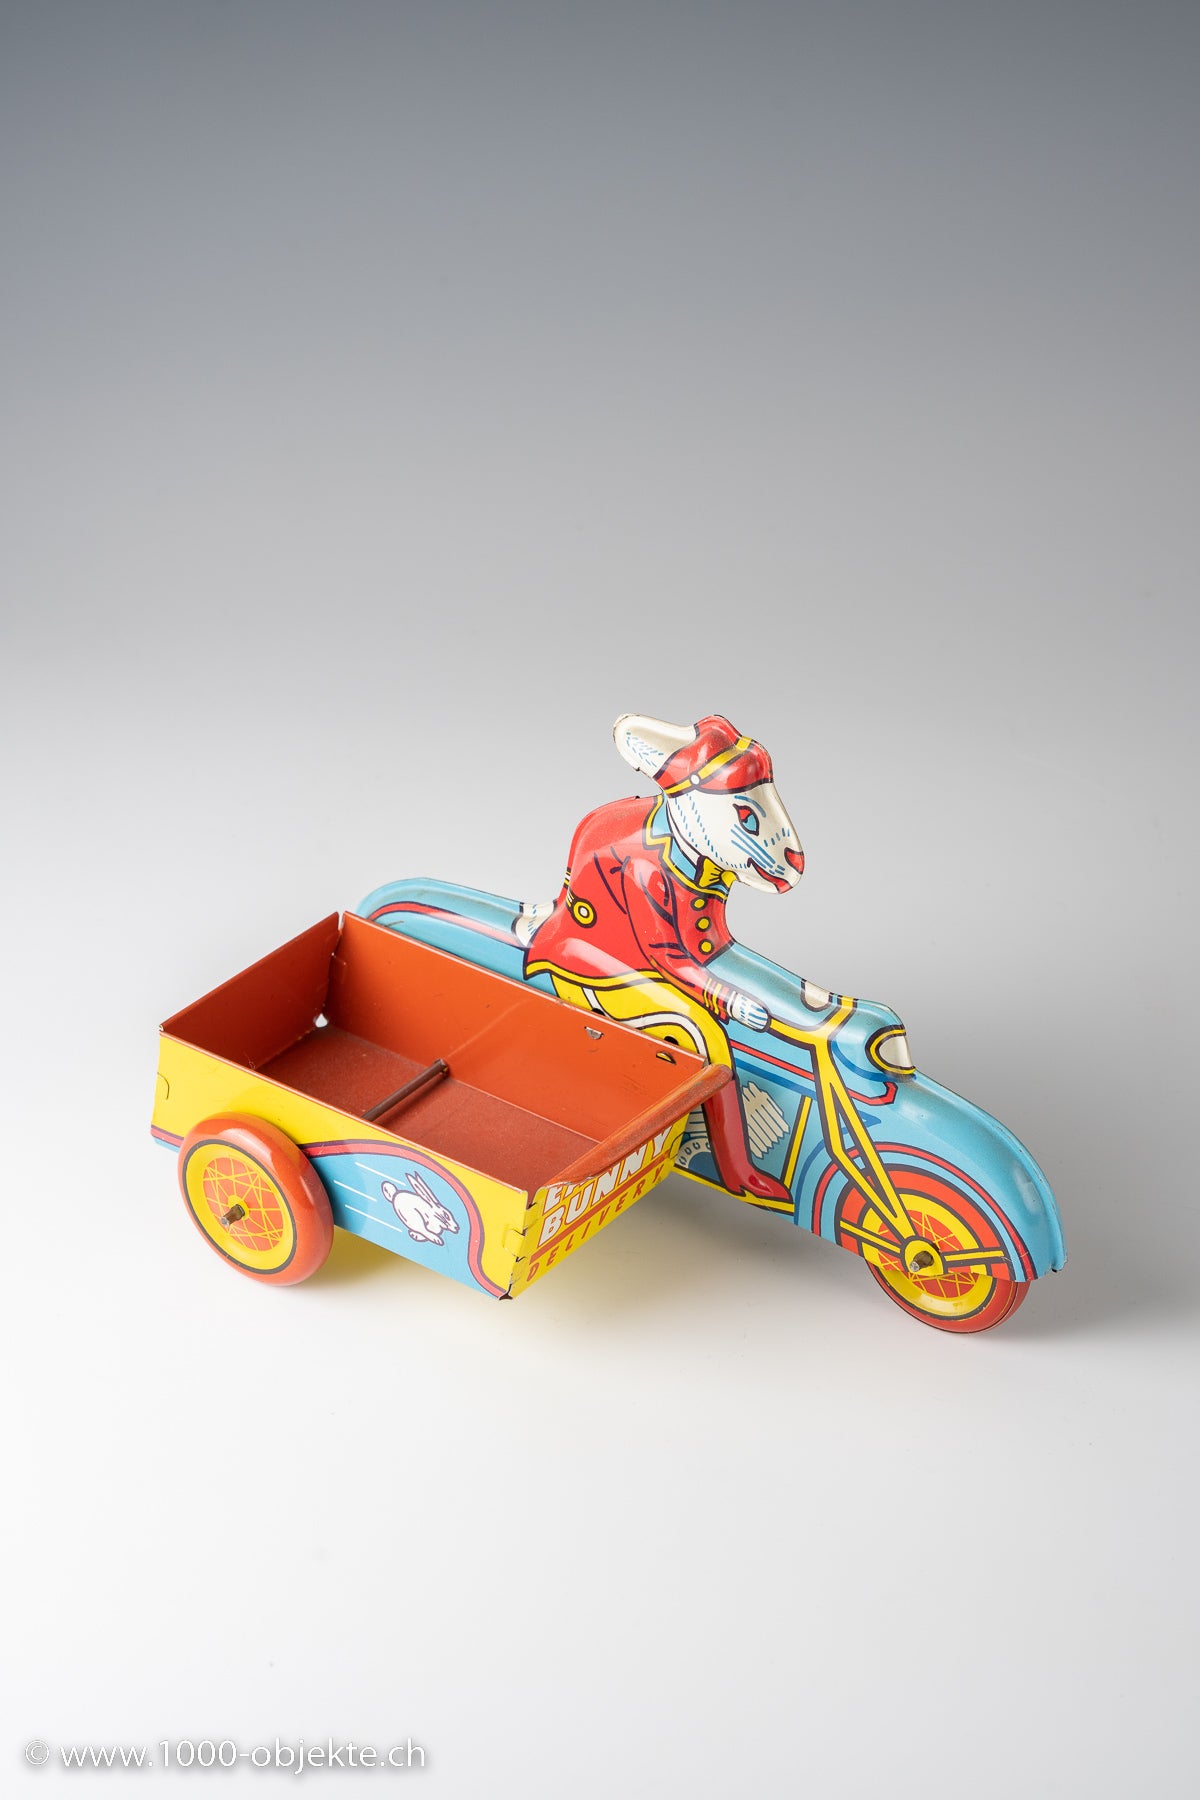 Wyandotte easter bunny delivery tin motorcycle toy